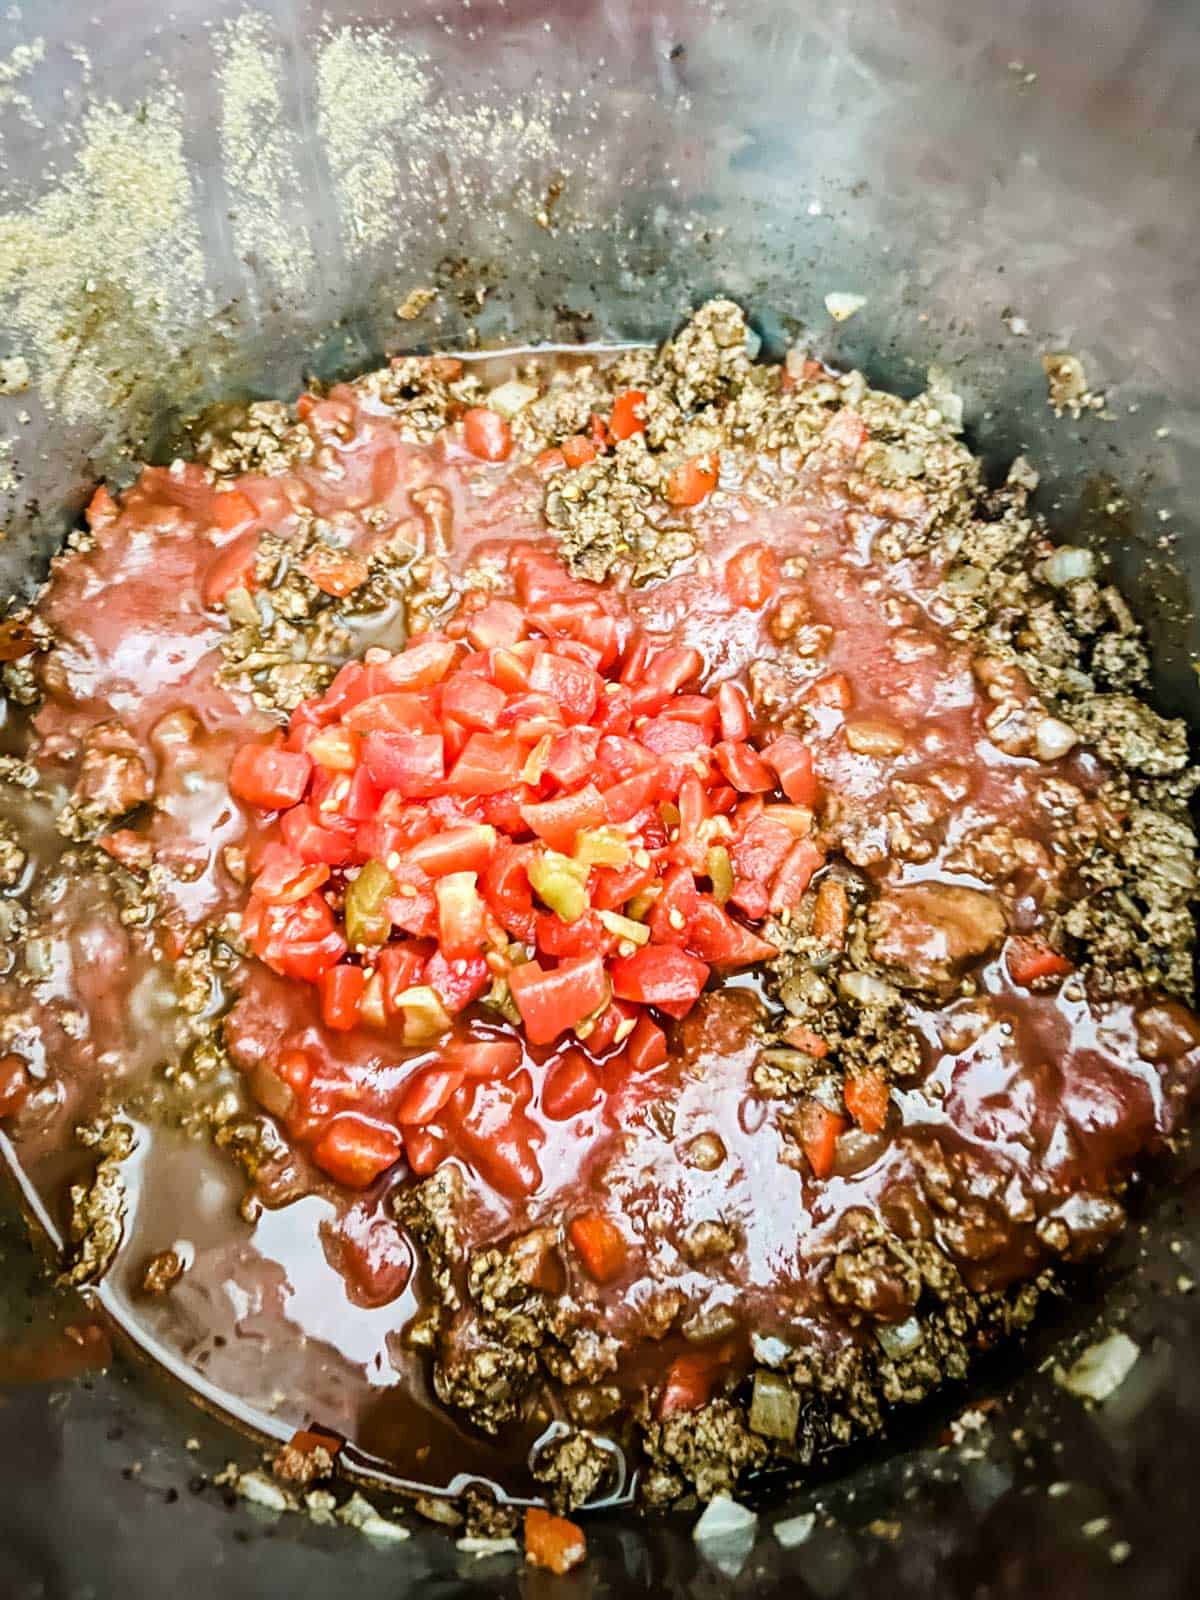 Tomatos and broth on top of seasoned ground beef and vegetables in an Instant Pot.